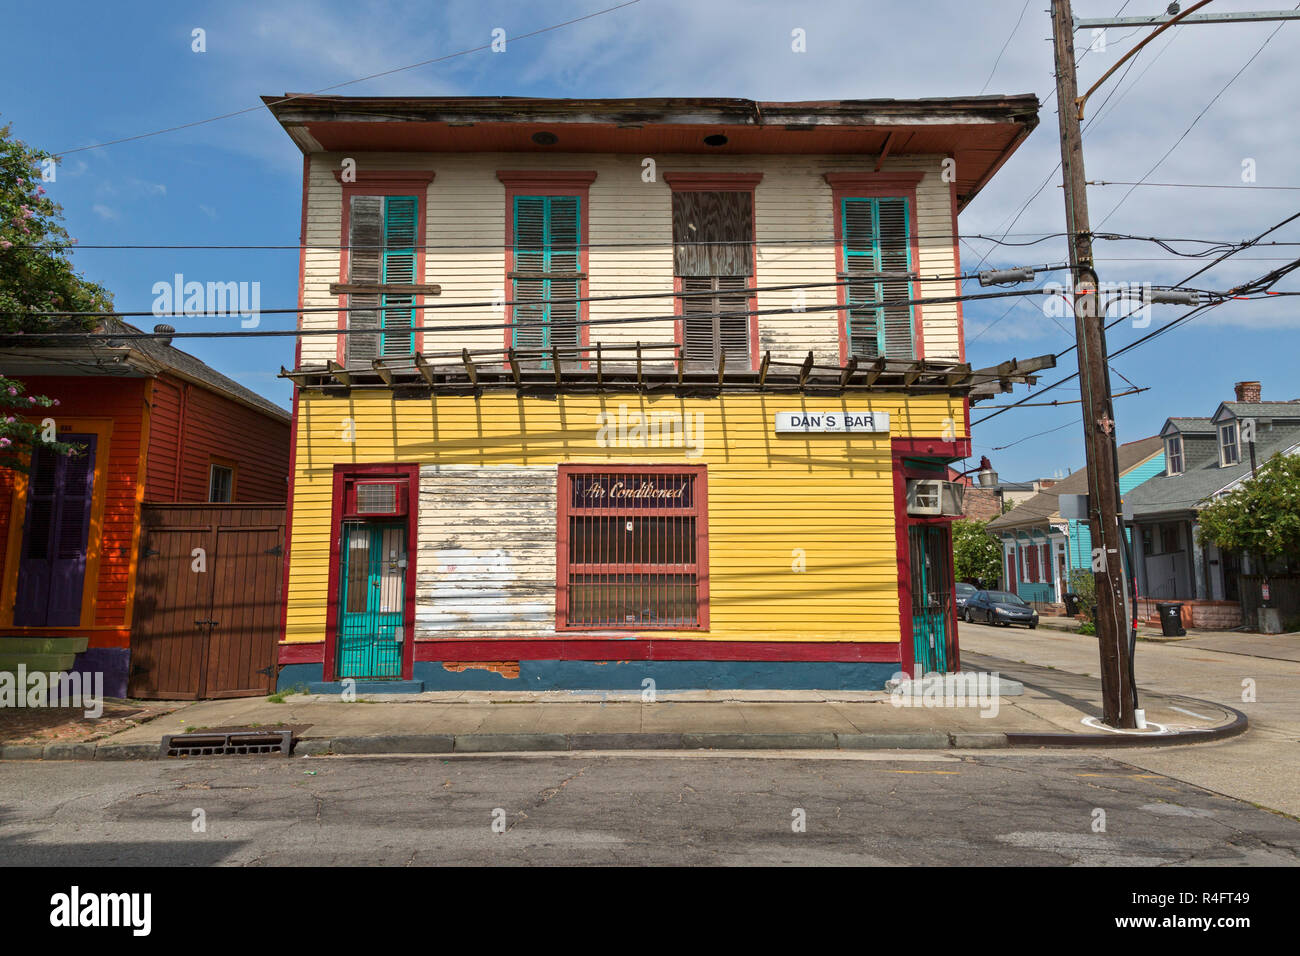 Dan's Bar, colorful building located in the Marigny area of New Orleans Louisiana. Stock Photo